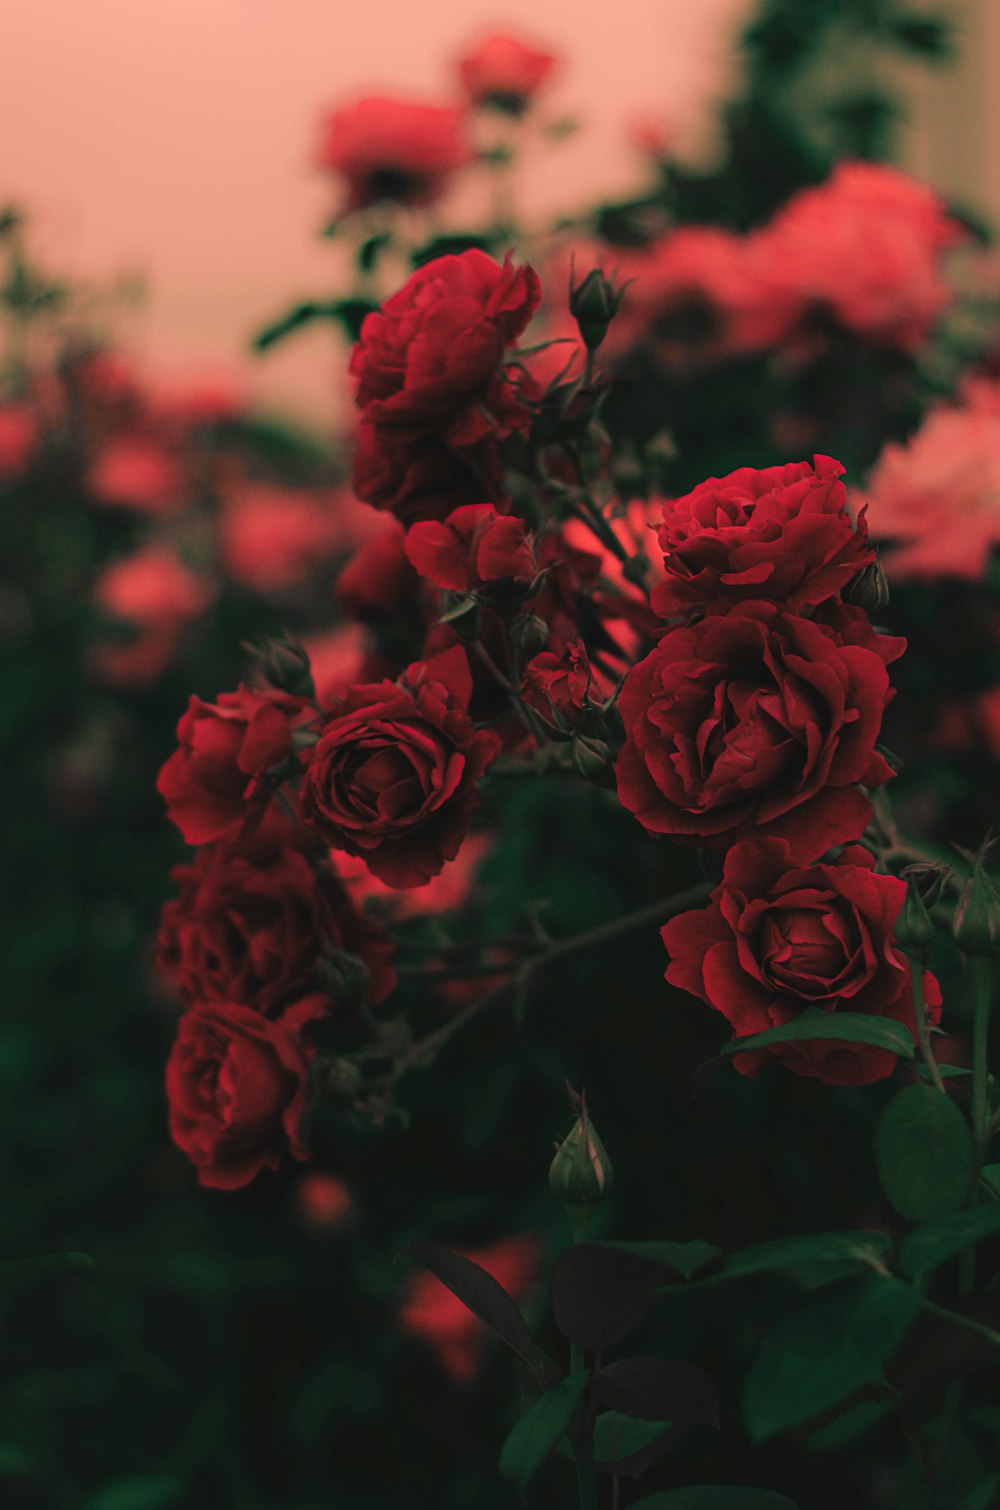 Shallow focus photography of red roses photo – Free Flower Image on Unsplash